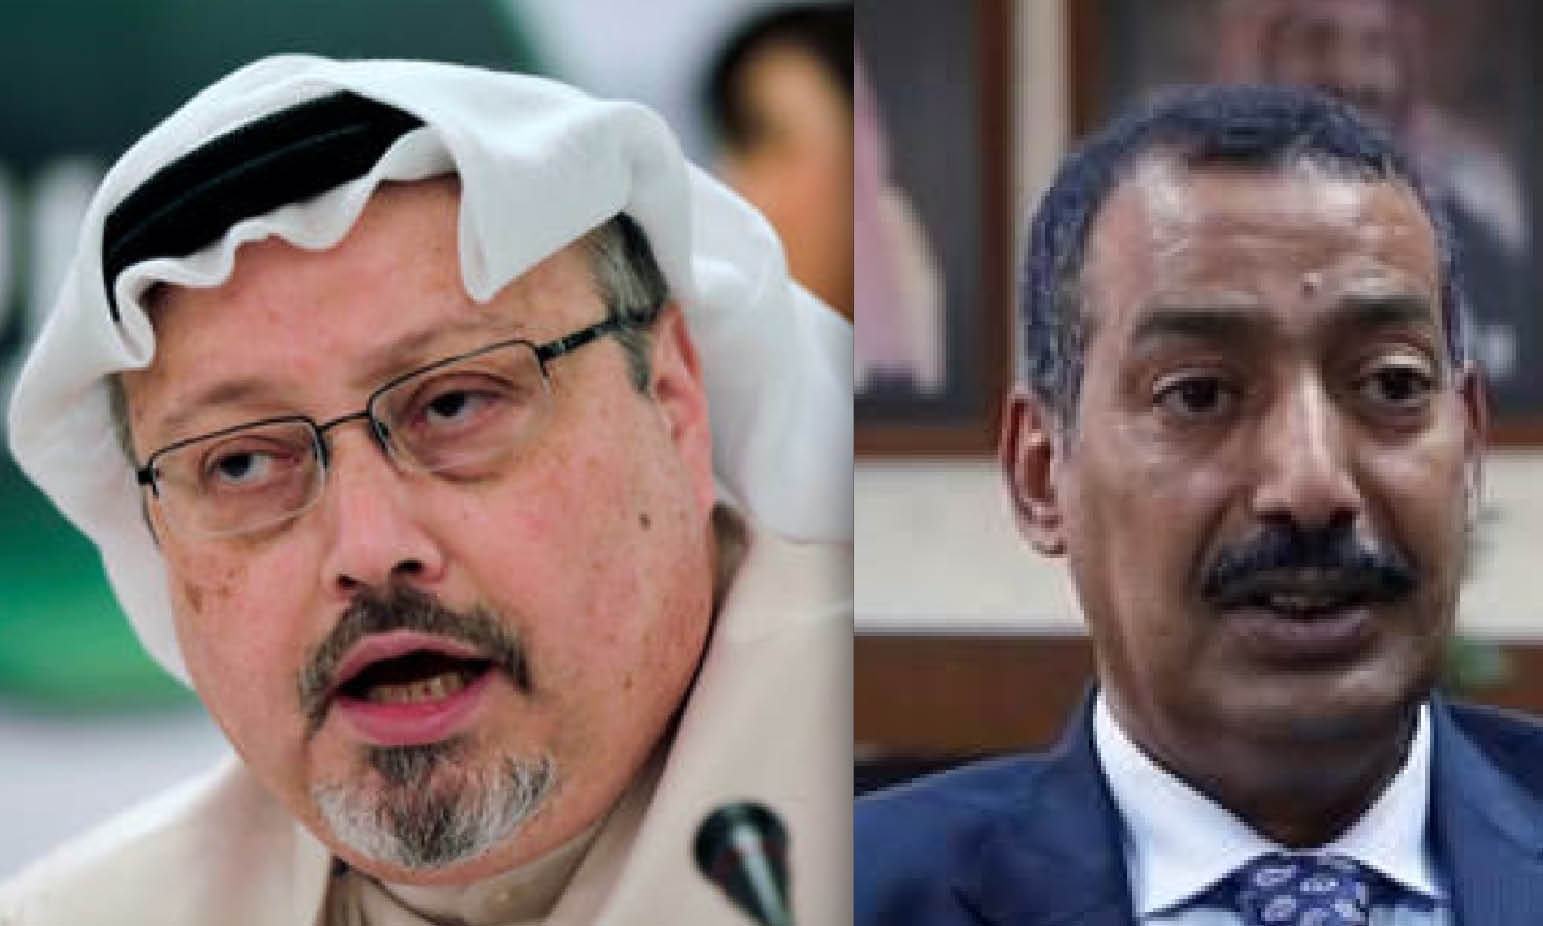 Five death sentences for Khashoggi murder. The Saudi consul acquitted and released